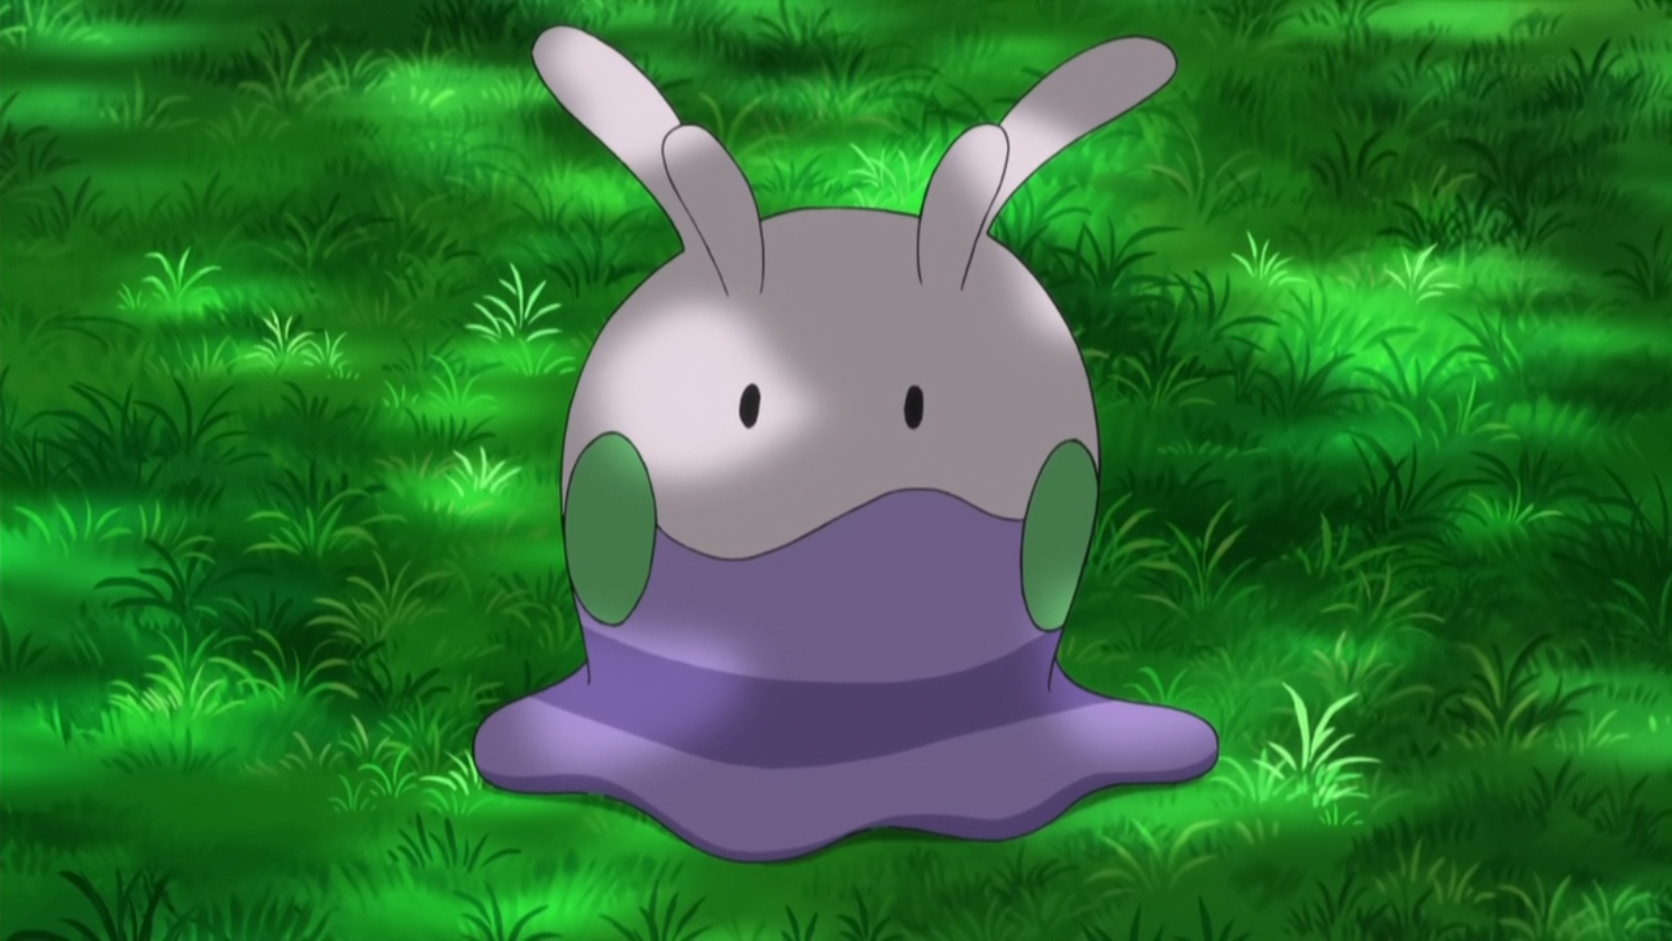 Goomy by Pixiescout on DeviantArt